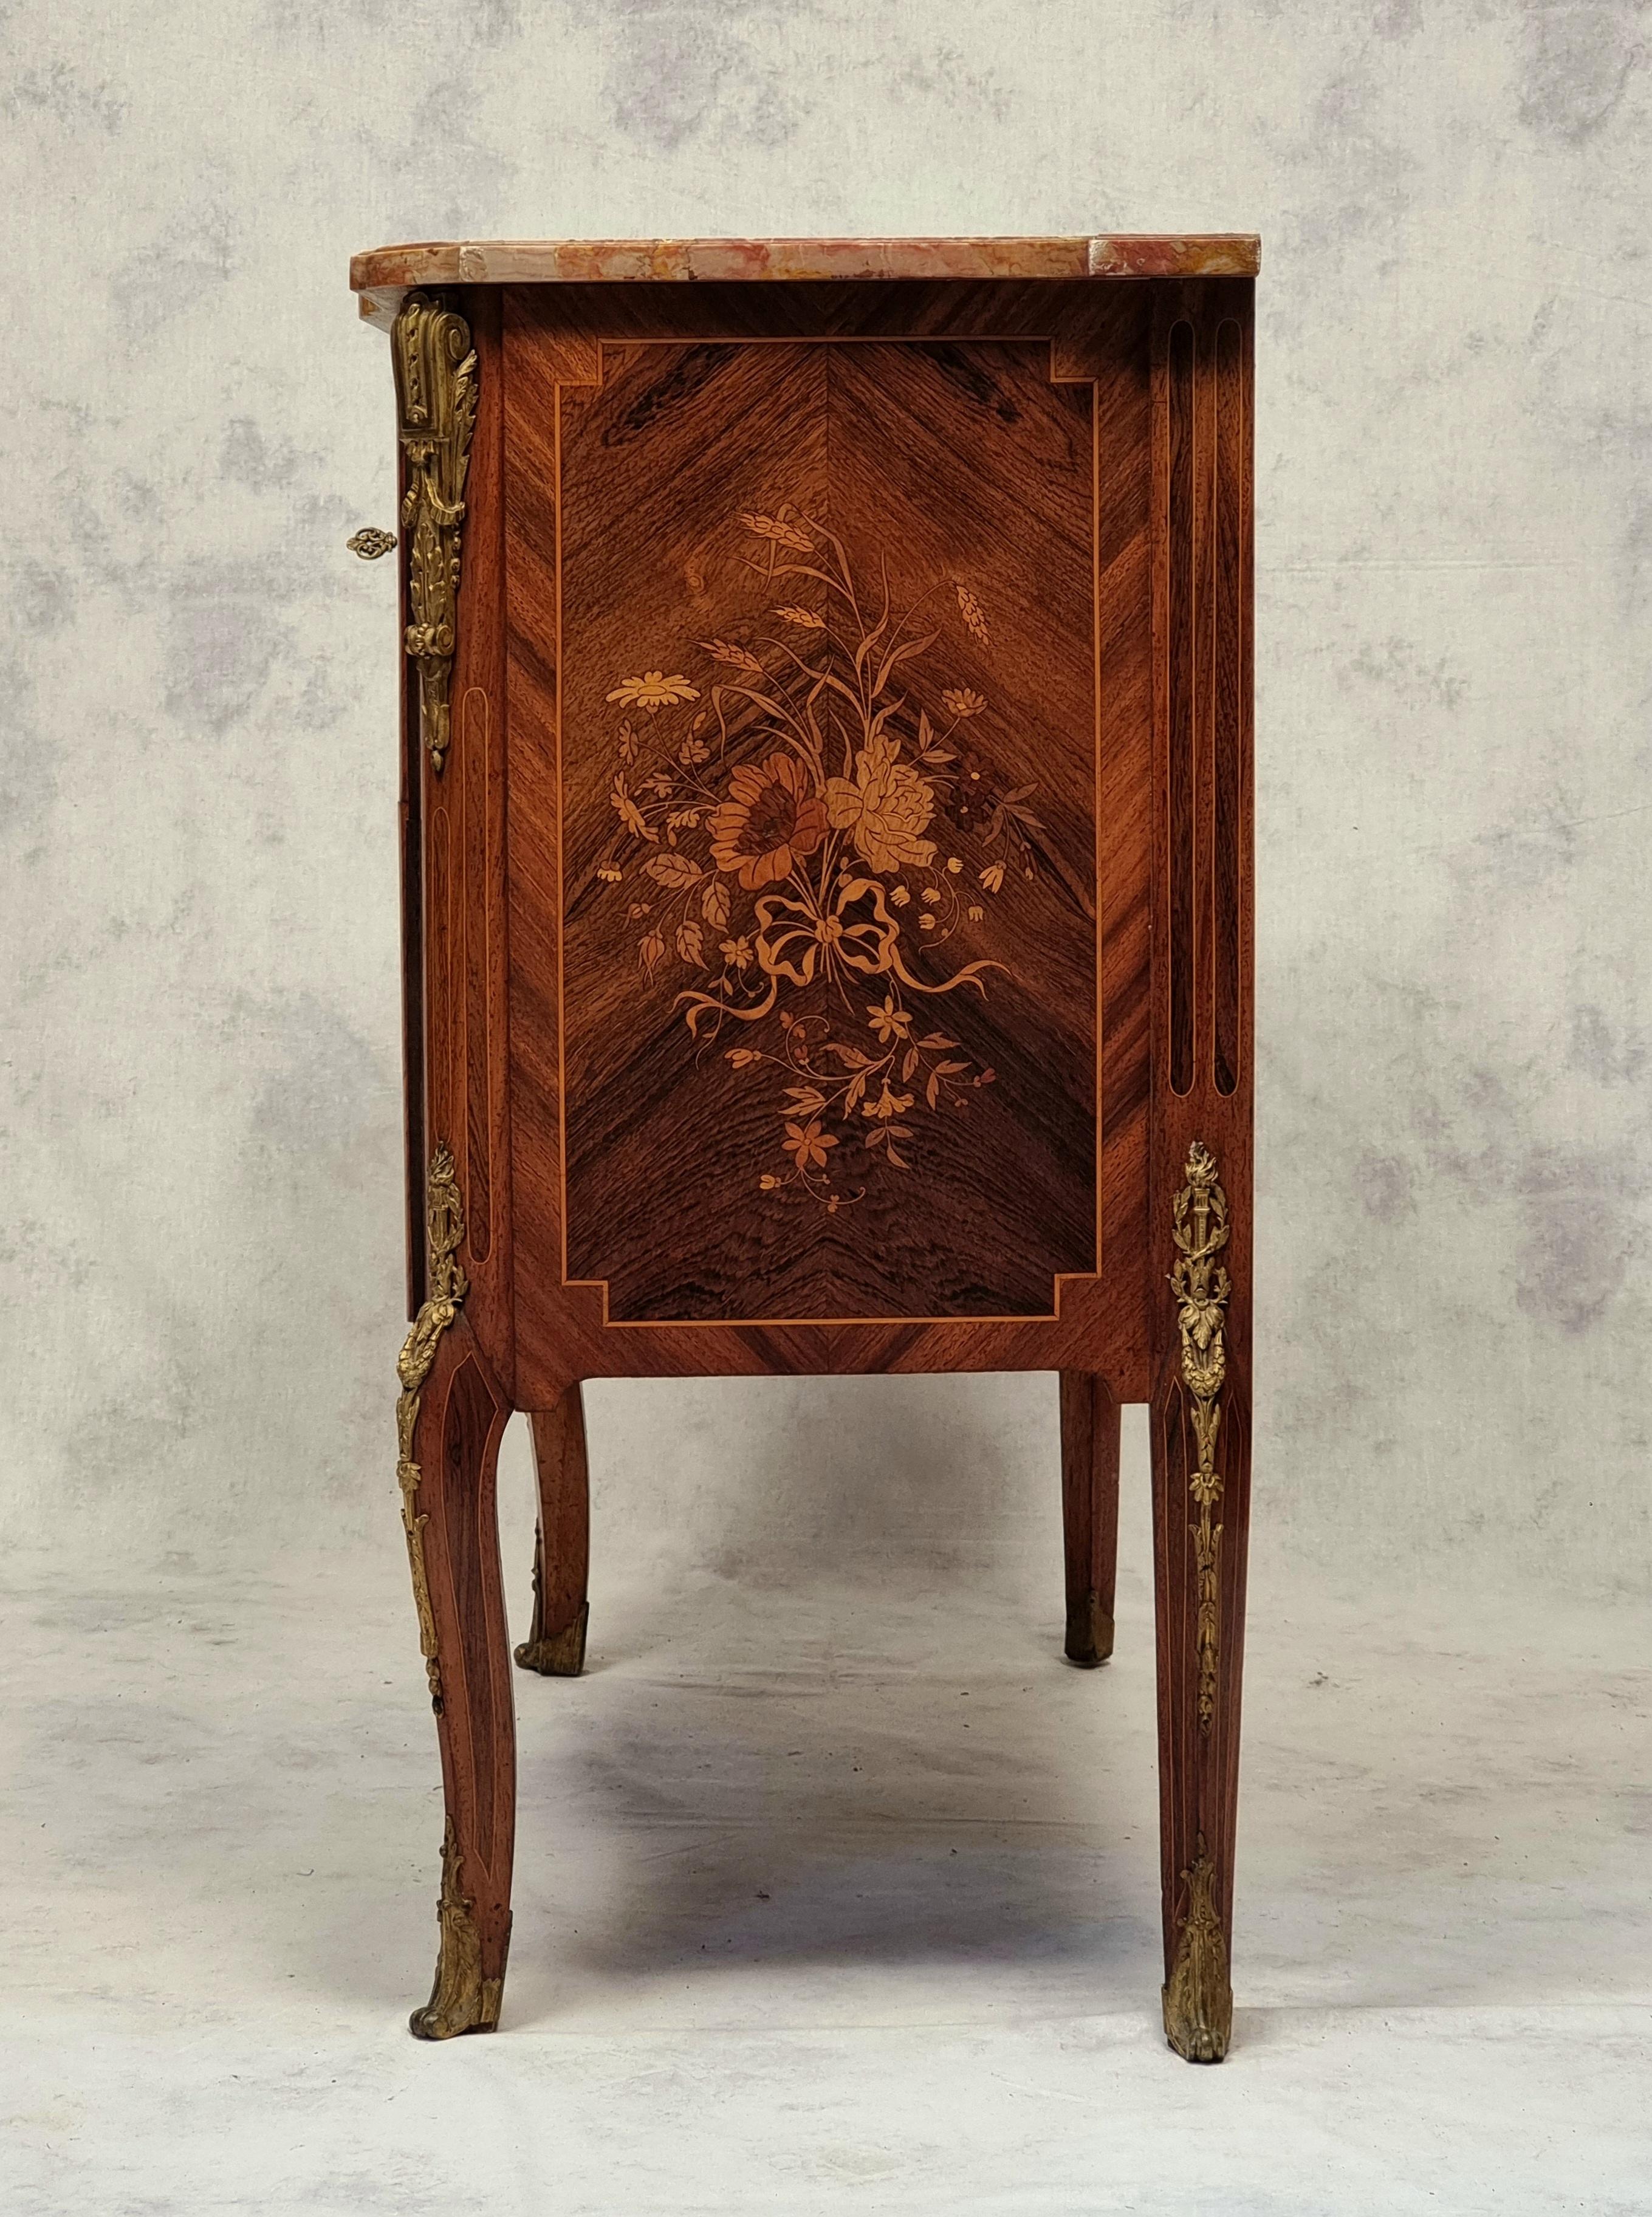 Louis XVI Transition Style Commode Napoleon III Period - Floral Marquetry - Rosewood - 19t